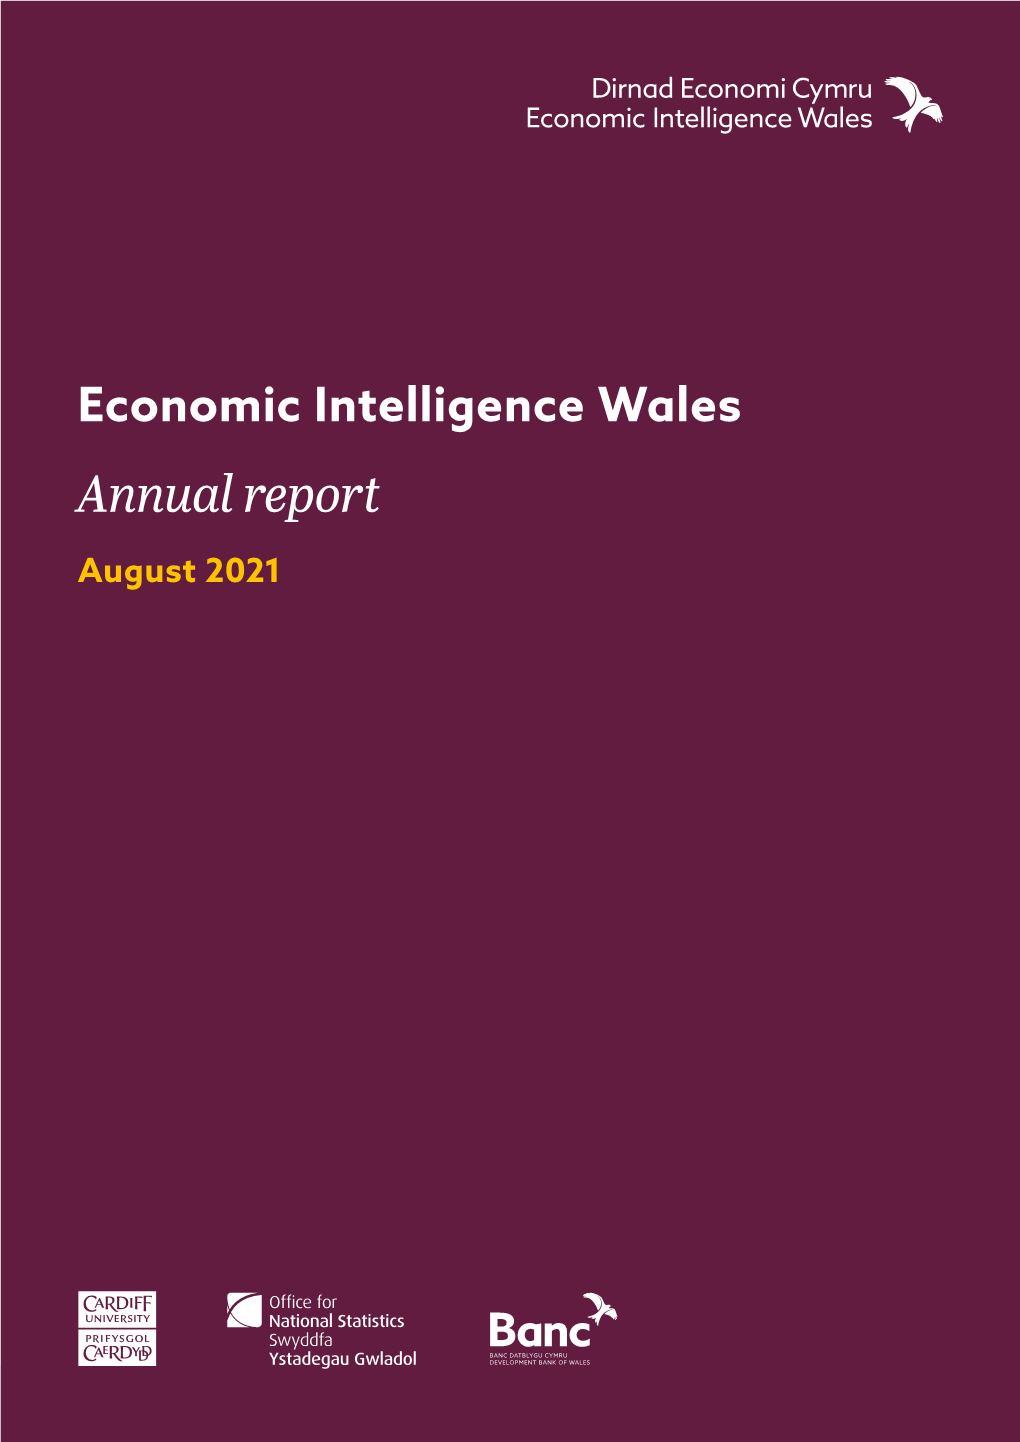 Annual Report, August 2021